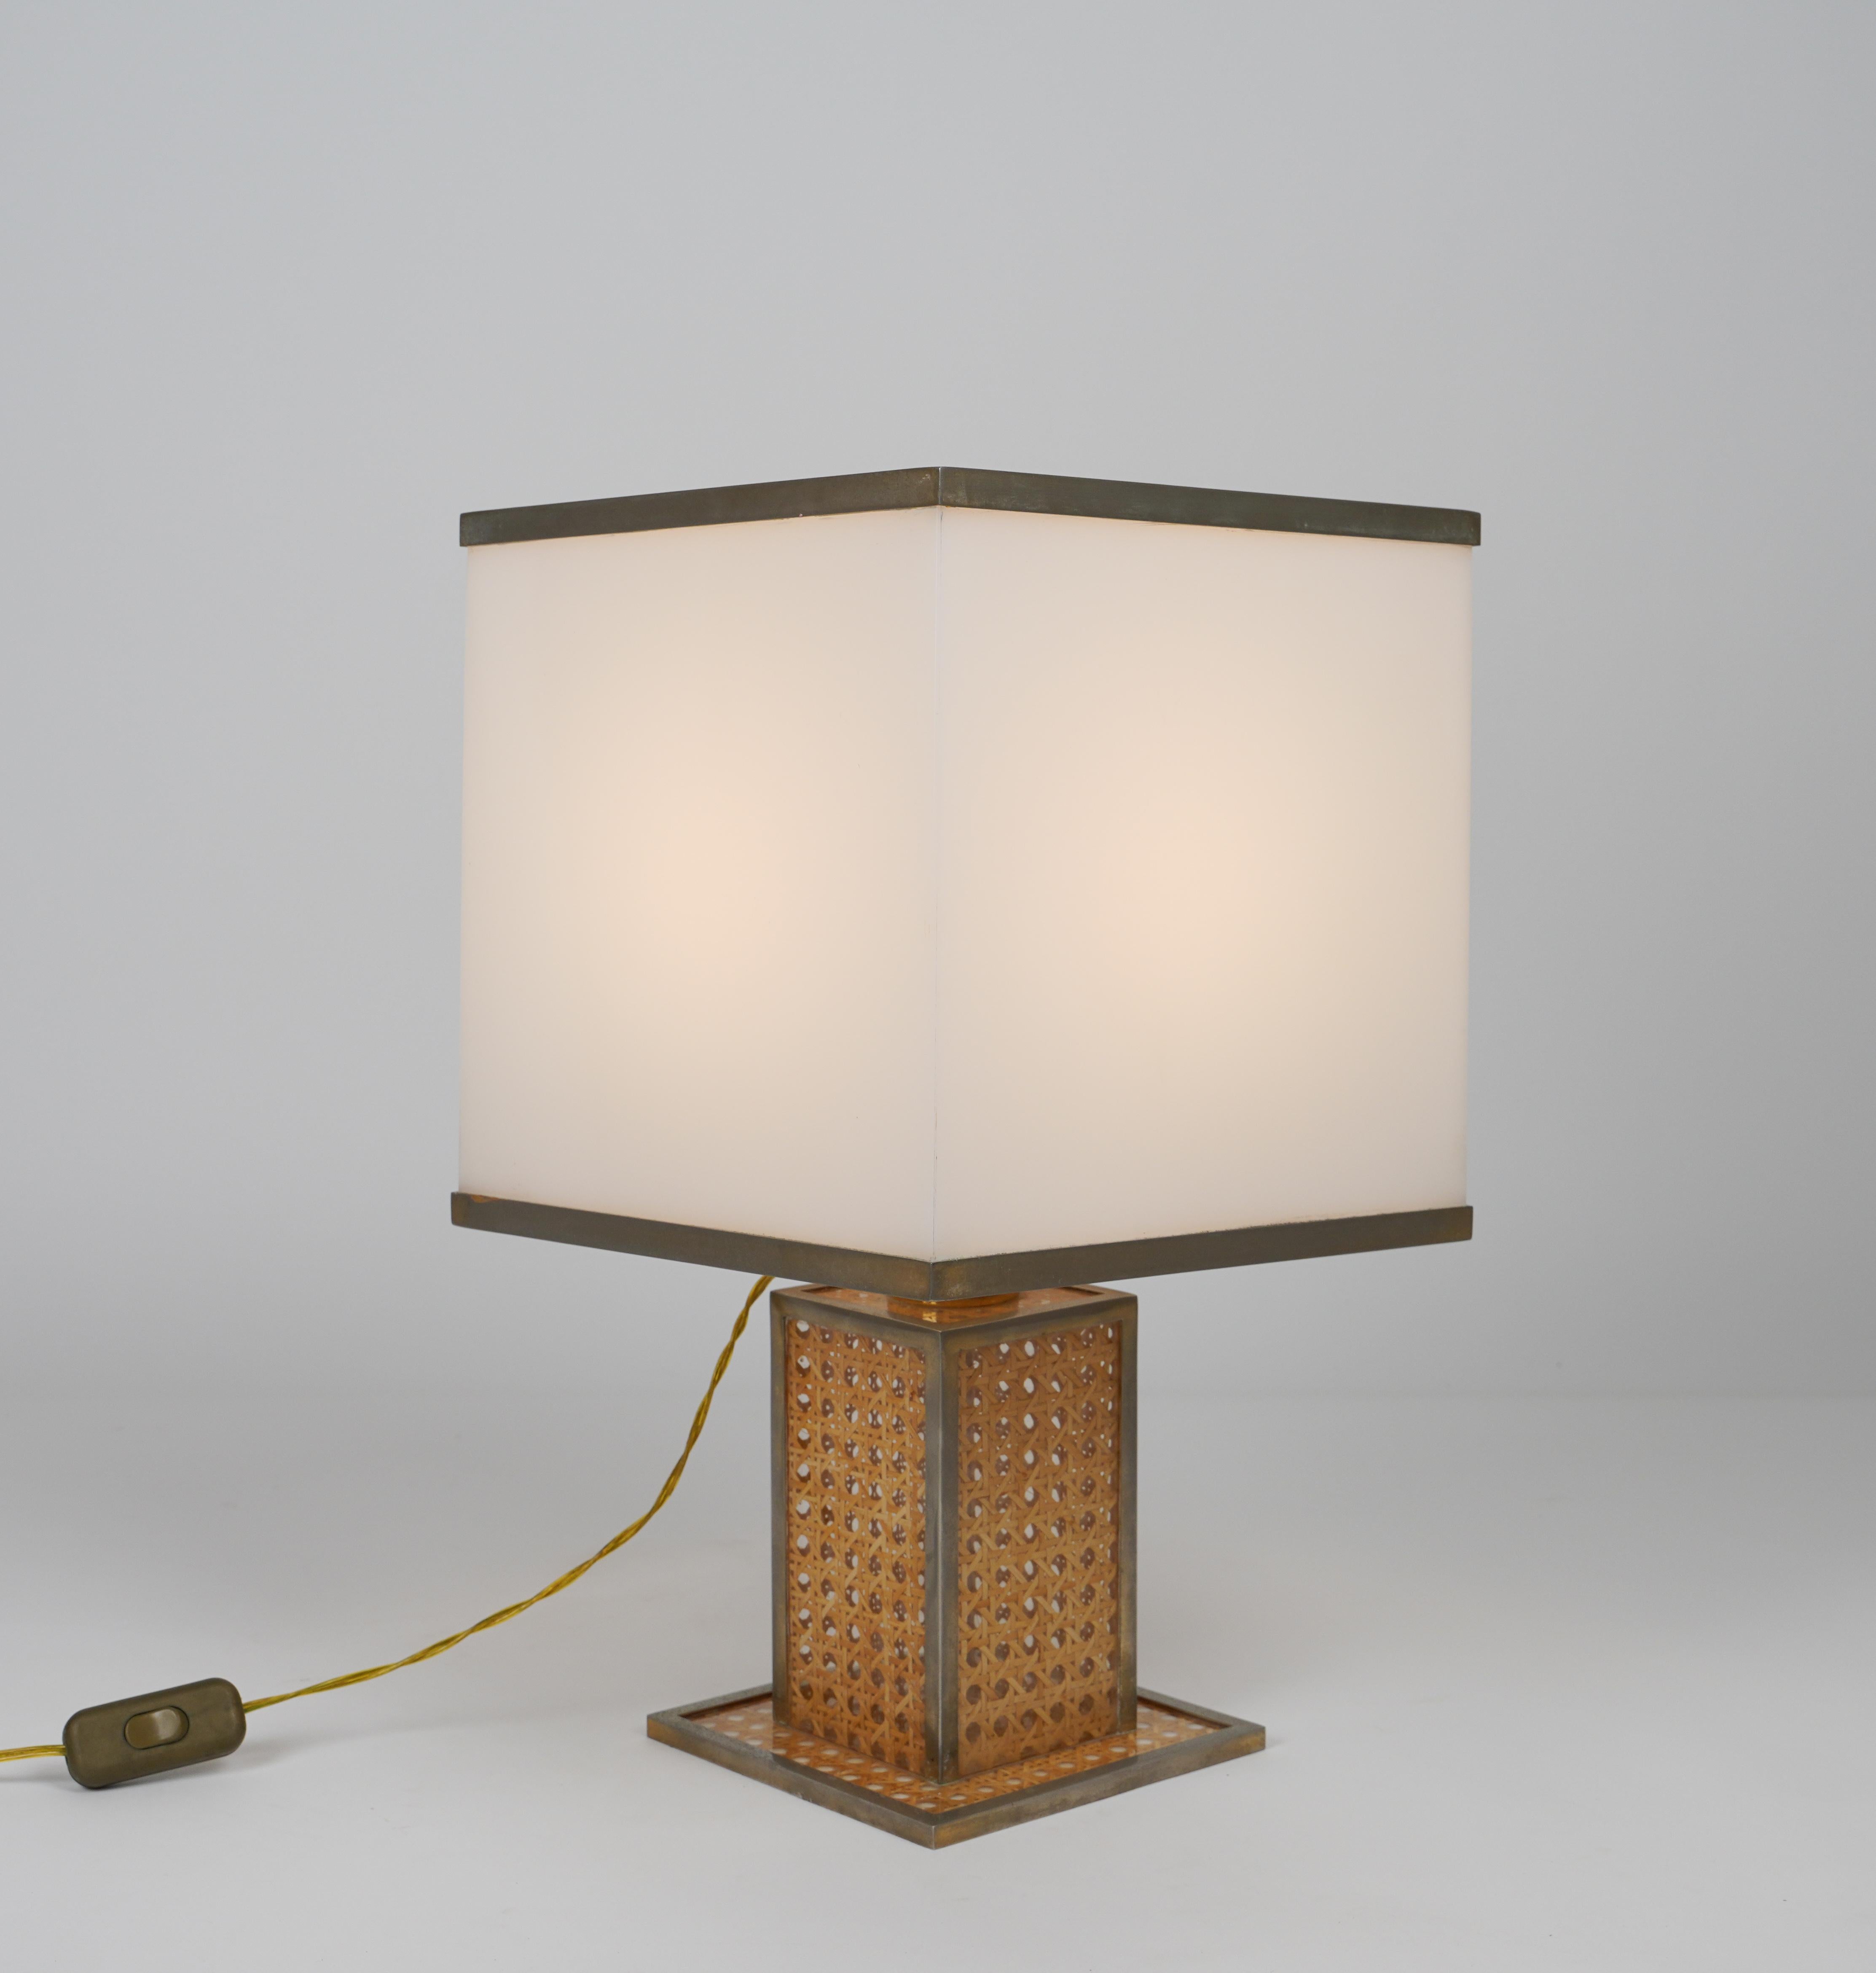 Table Lamp in Lucite, Rattan and Brass Christian Dior Style, Italy 1970s For Sale 6